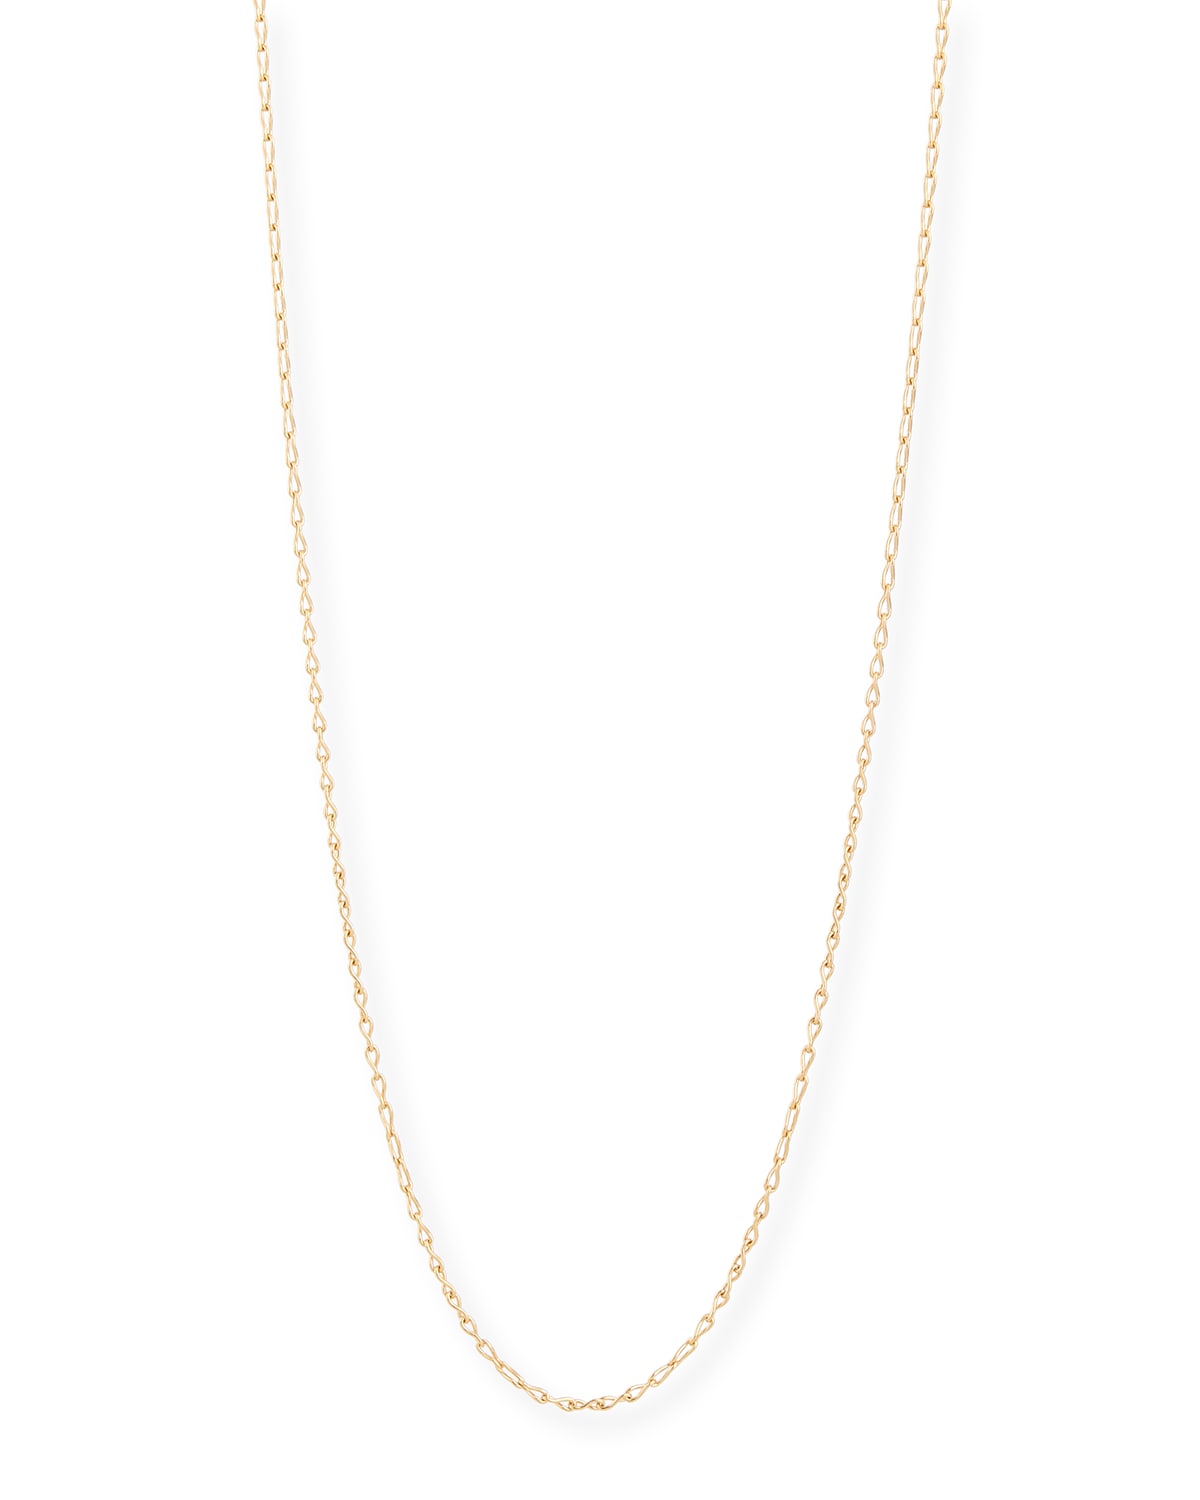 18K Rose Gold Eight Chain, 35"L